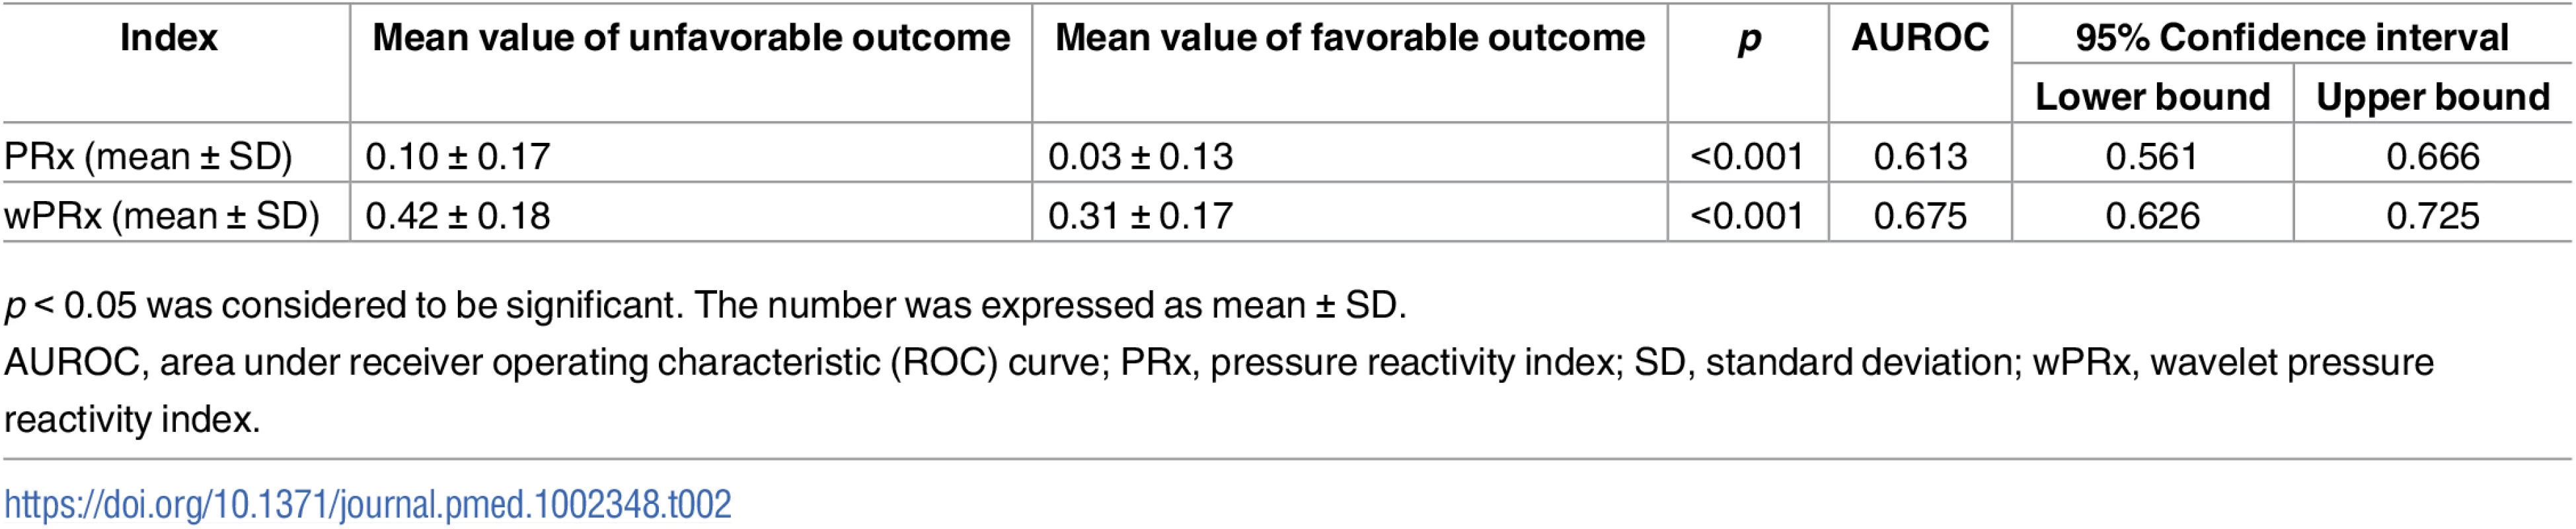 The ability of PRx/wPRx in distinguishing favorable and unfavorable patient outcomes.